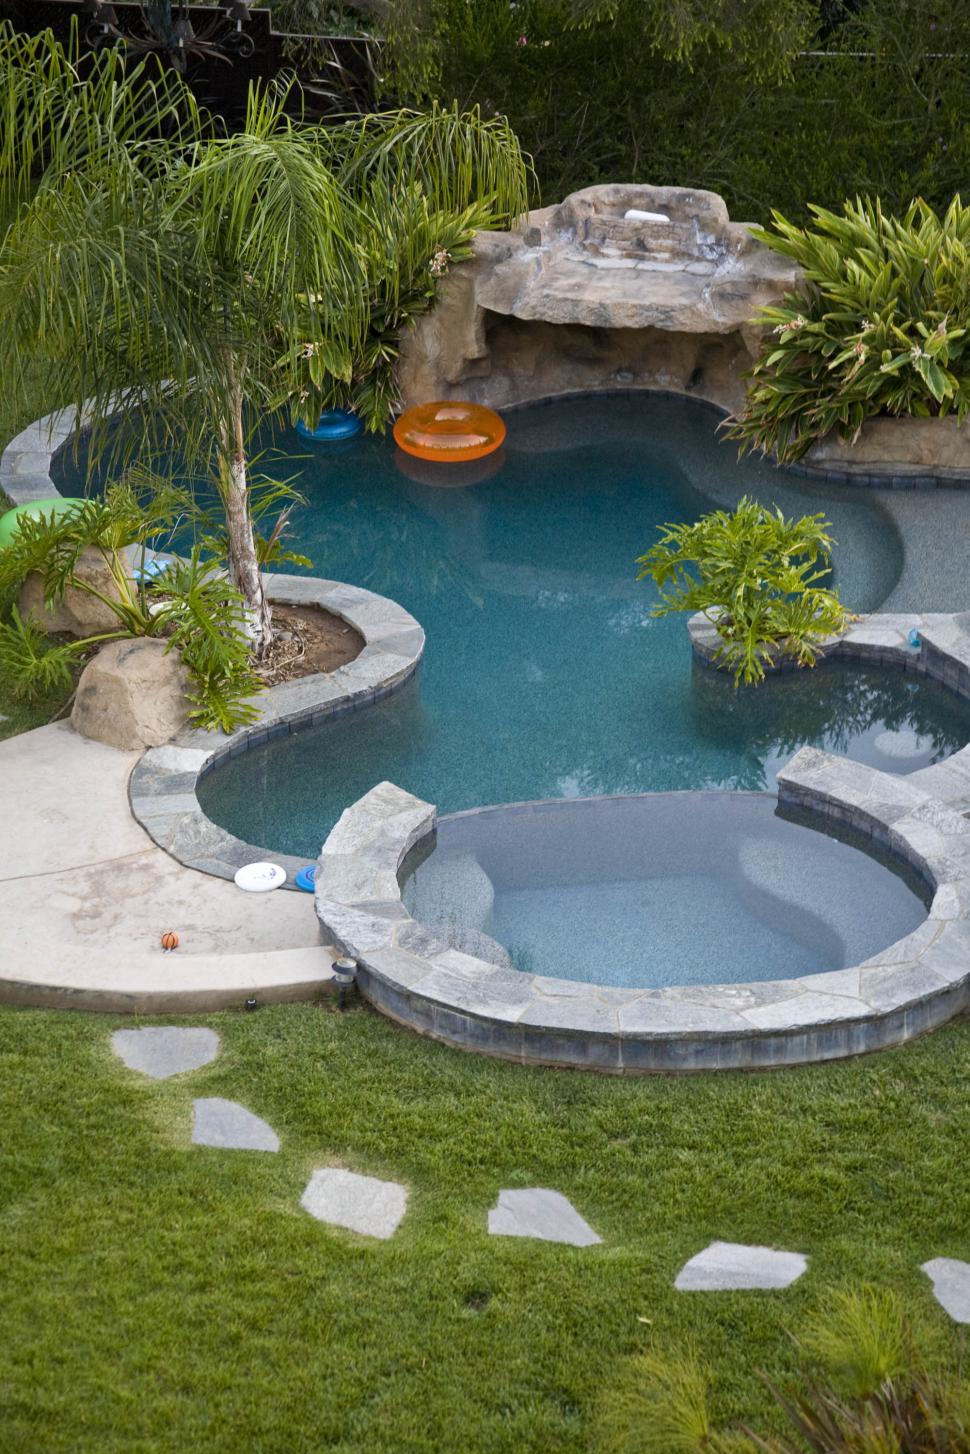 Free Image of Outdoor Pool 